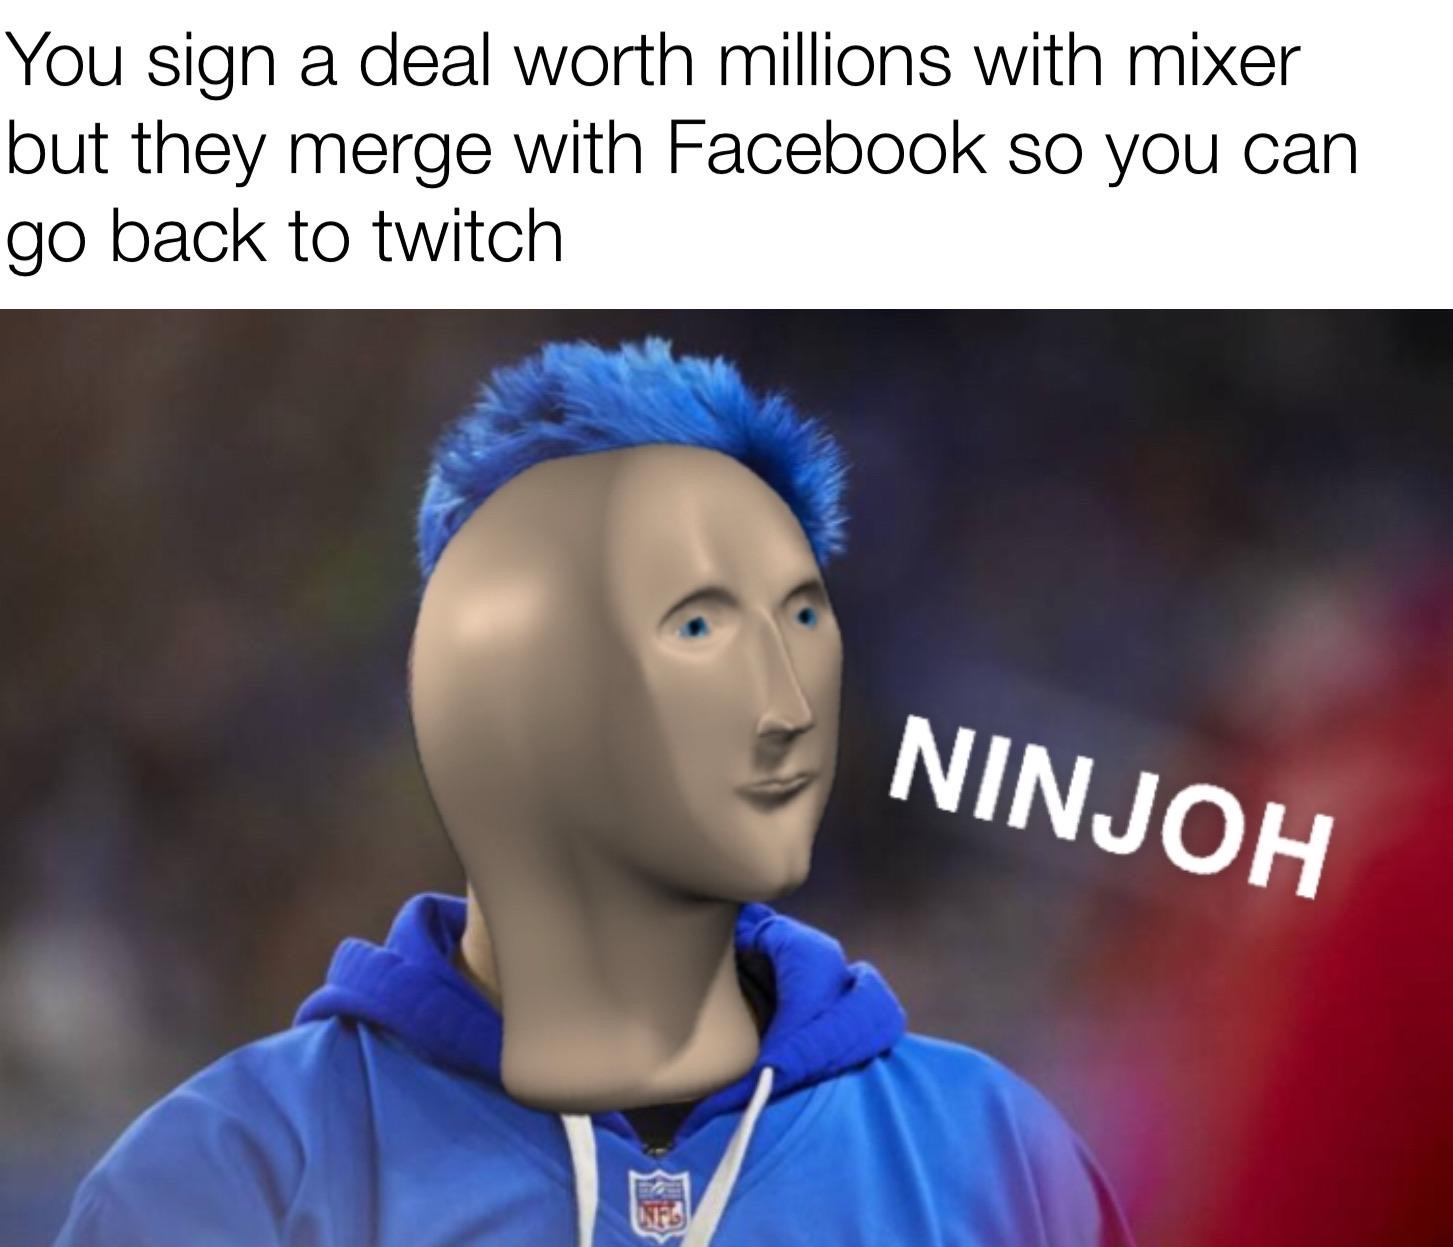 photo caption - You sign a deal worth millions with mixer but they merge with Facebook so you can go back to twitch Ninjoh